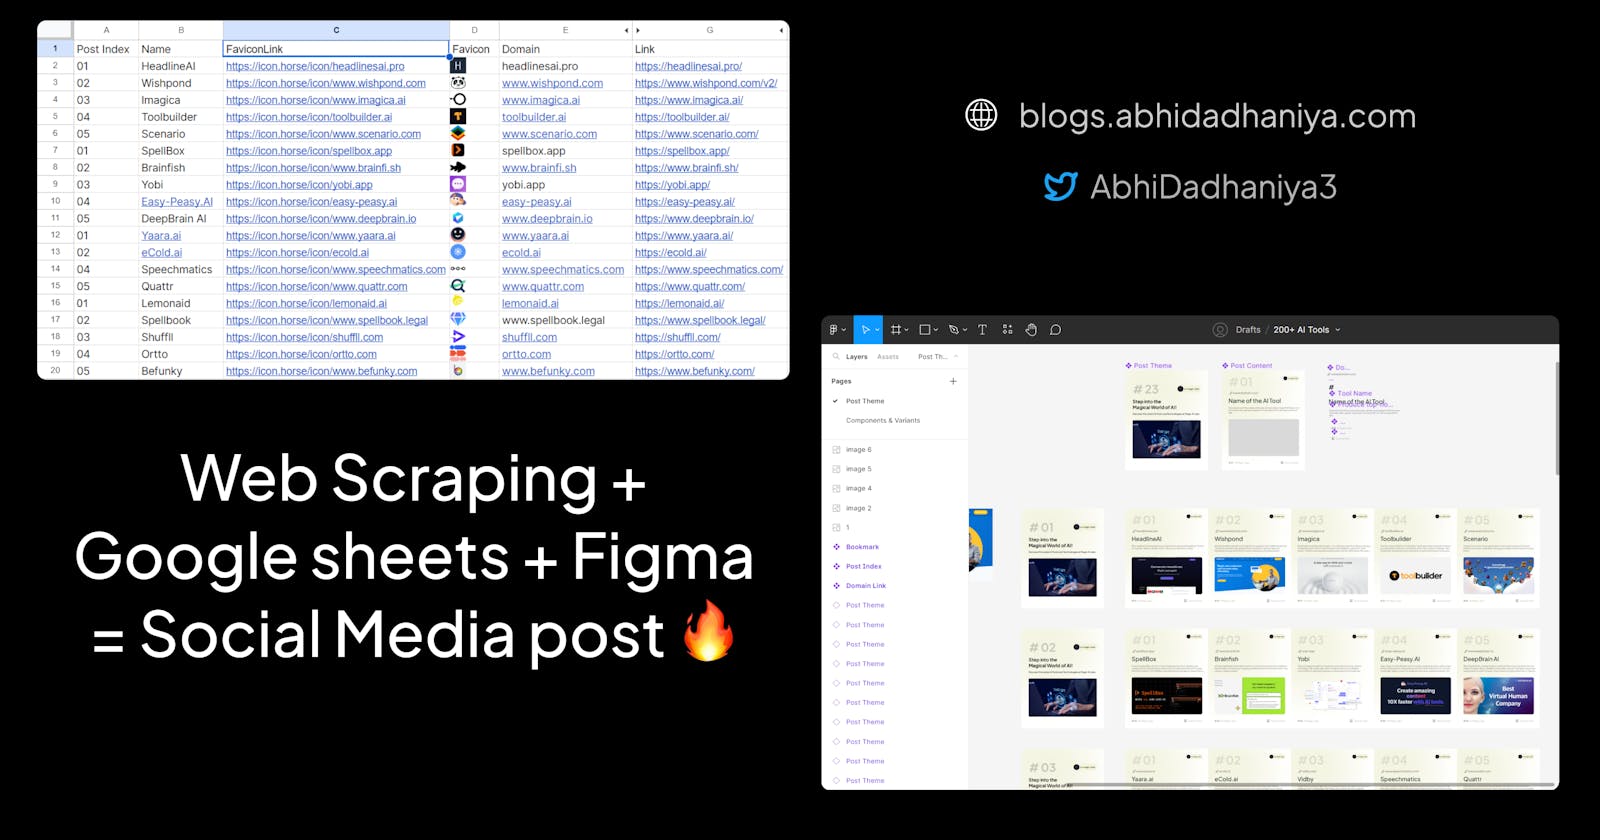 From Data Scraping to Figma: A Beginner's Guide to Creating Engaging Social Media Content